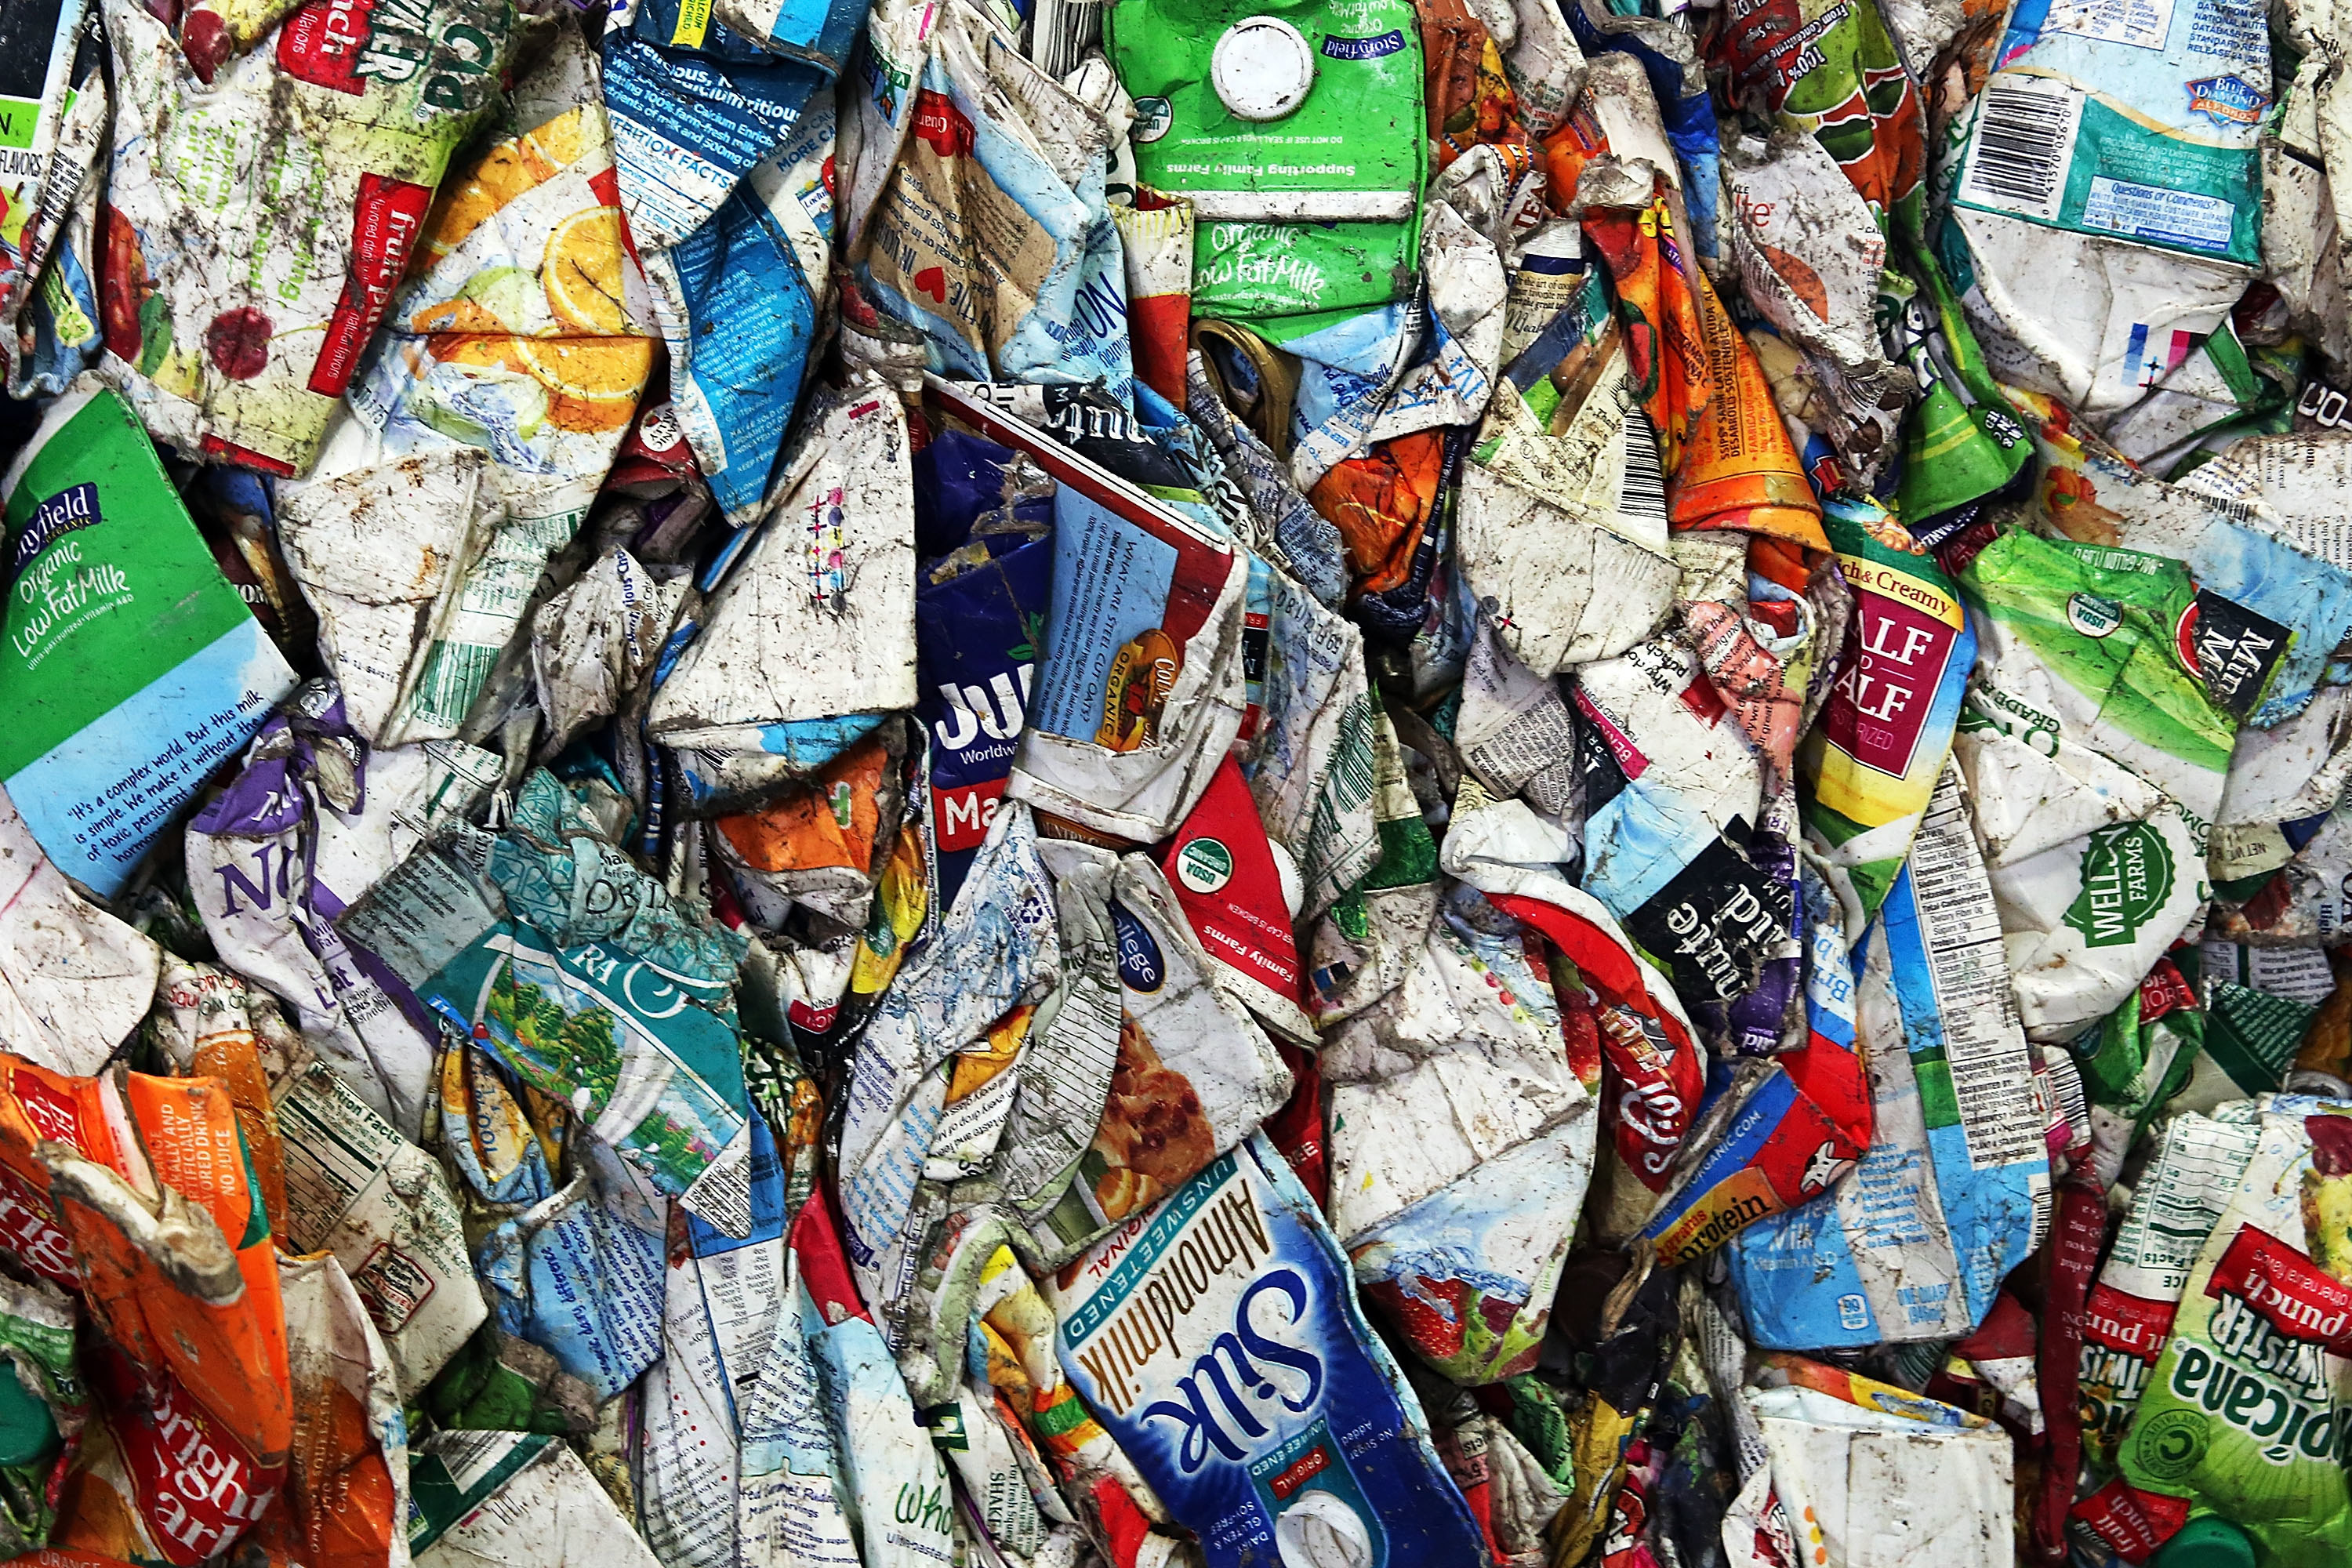 Close up view of milk cartons and recycled containers in a New York facility.